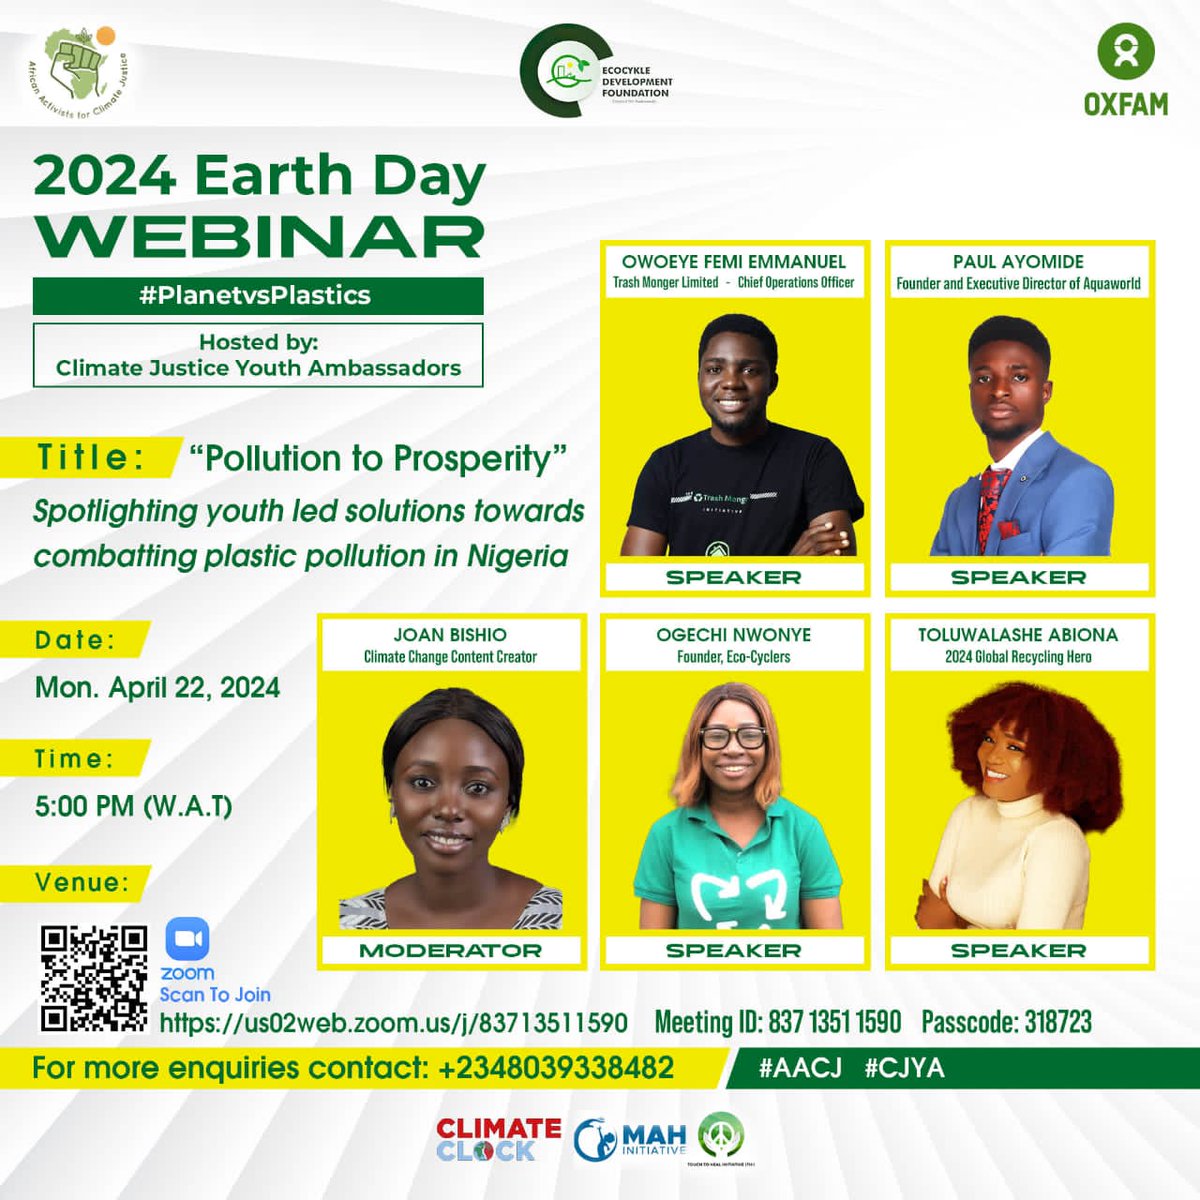 Climate Justice Youth Ambassadors (CJYA) in collaboration with OXFAM and AACJ invites you to its inaugural webinar in commemoration of the Earth Day 2024 themed: Planet Vs. Plastics. 

Click link to register forms.gle/4x9fG2mt1jx5my… 

#AACJ #CJYA #EarthDay2024